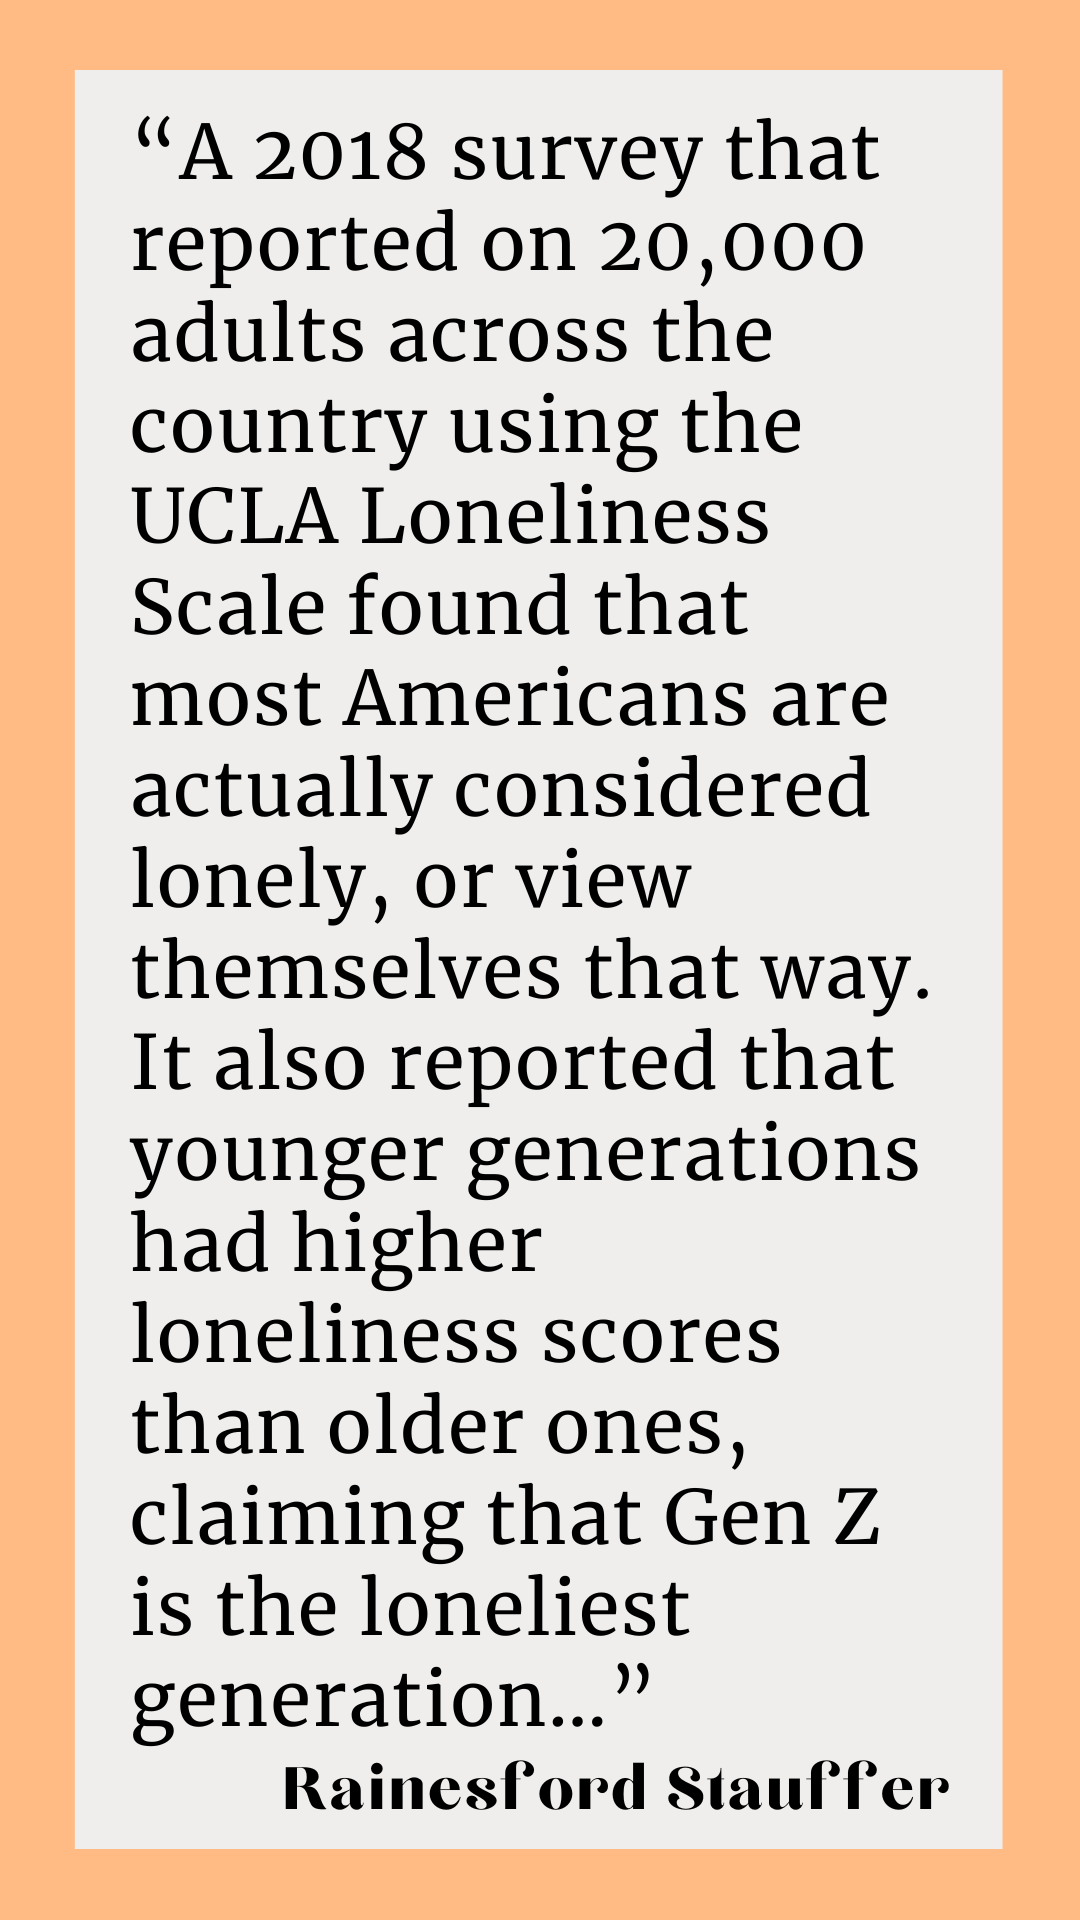 According to Rainesford Stauffer, “A 2018 survey that reported on 20,000 adults across the country using the UCLA Loneliness Scale found that most Americans are actually considered lonely, or view themselves that way. It also reported that younger generations had higher loneliness scores than older ones, claiming that Gen Z is the loneliest generation…”